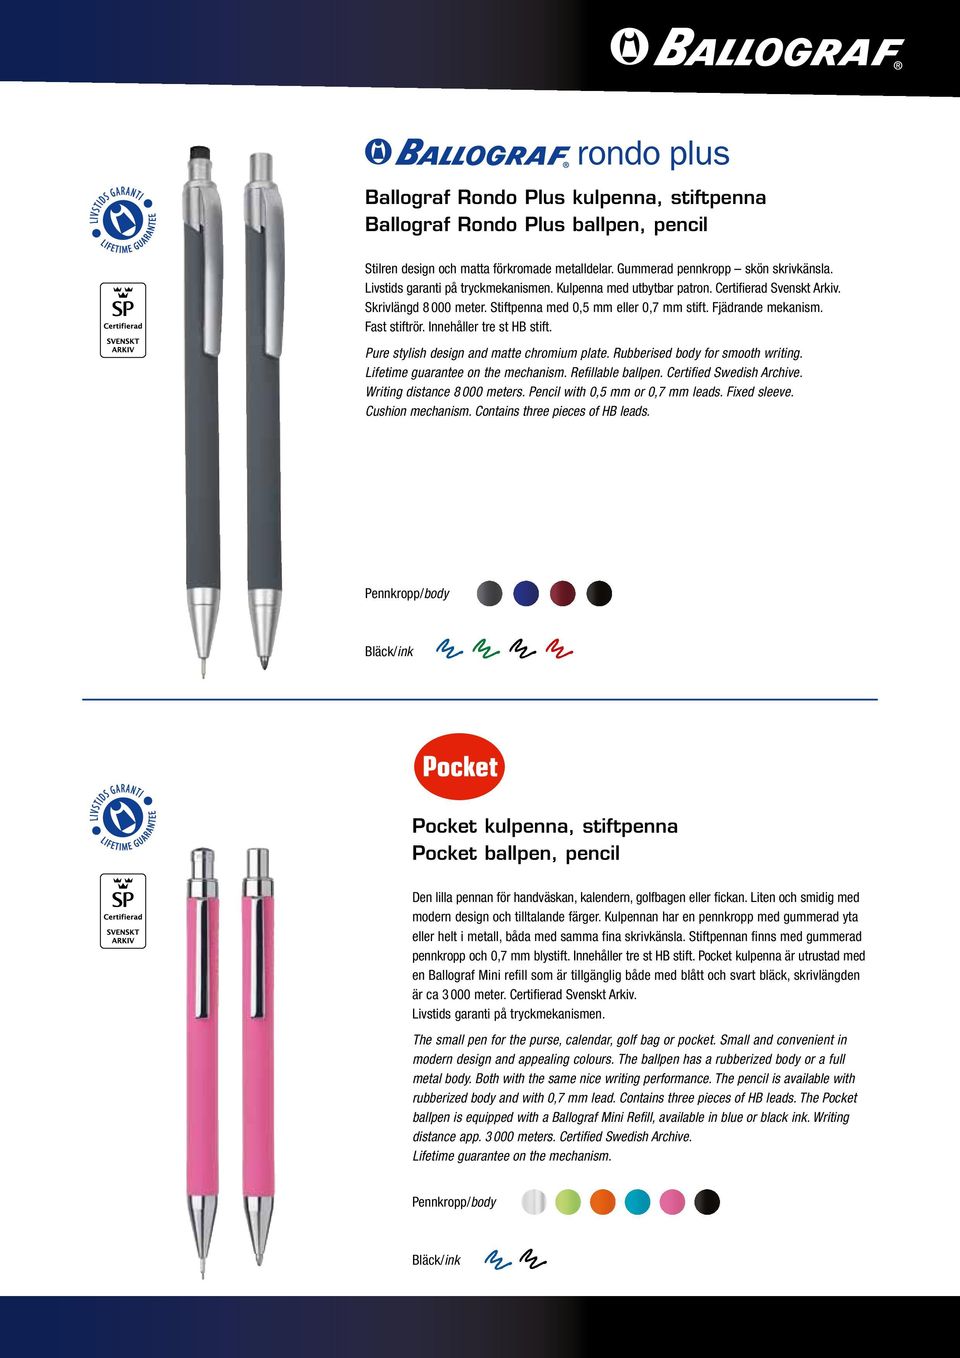 Innehåller tre st HB stift. Pure stylish design and matte chromium plate. Rubberised body for smooth writing. Lifetime guarantee on the mechanism. Refillable ballpen. Certified Swedish Archive.